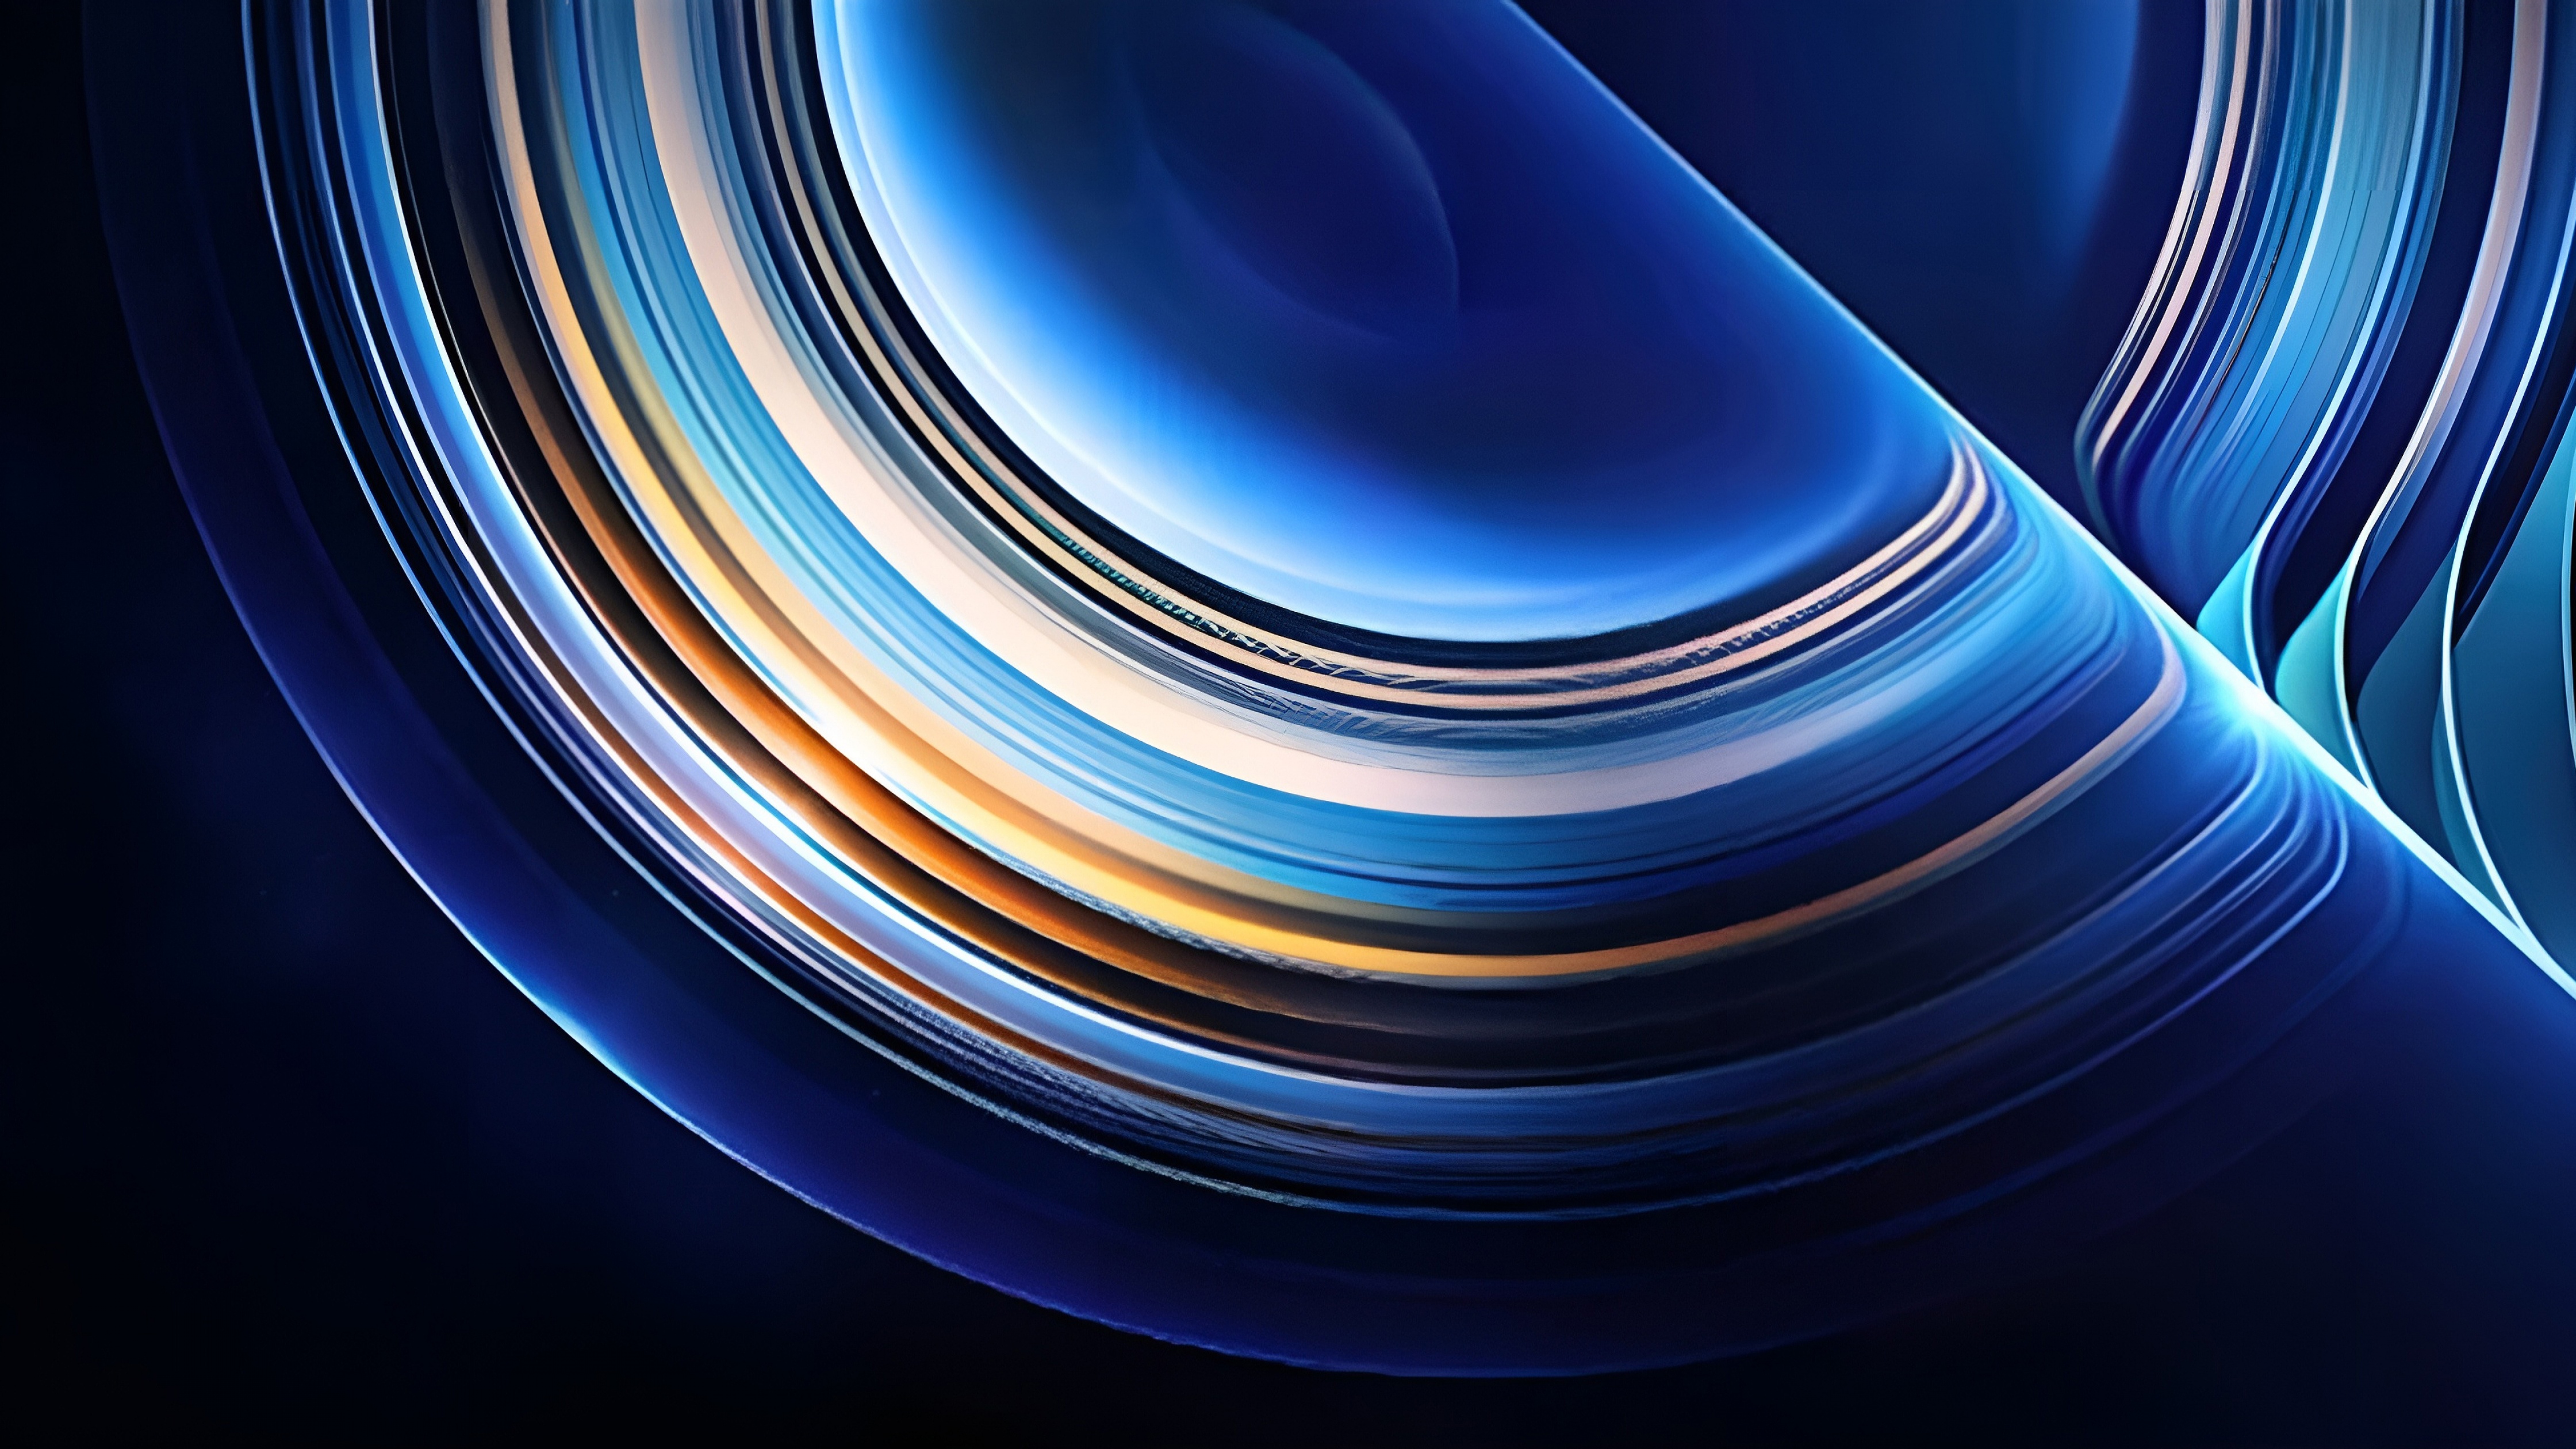 Download Redmi Note 8 Pro Wallpapers in HD Quality  Gizmochina